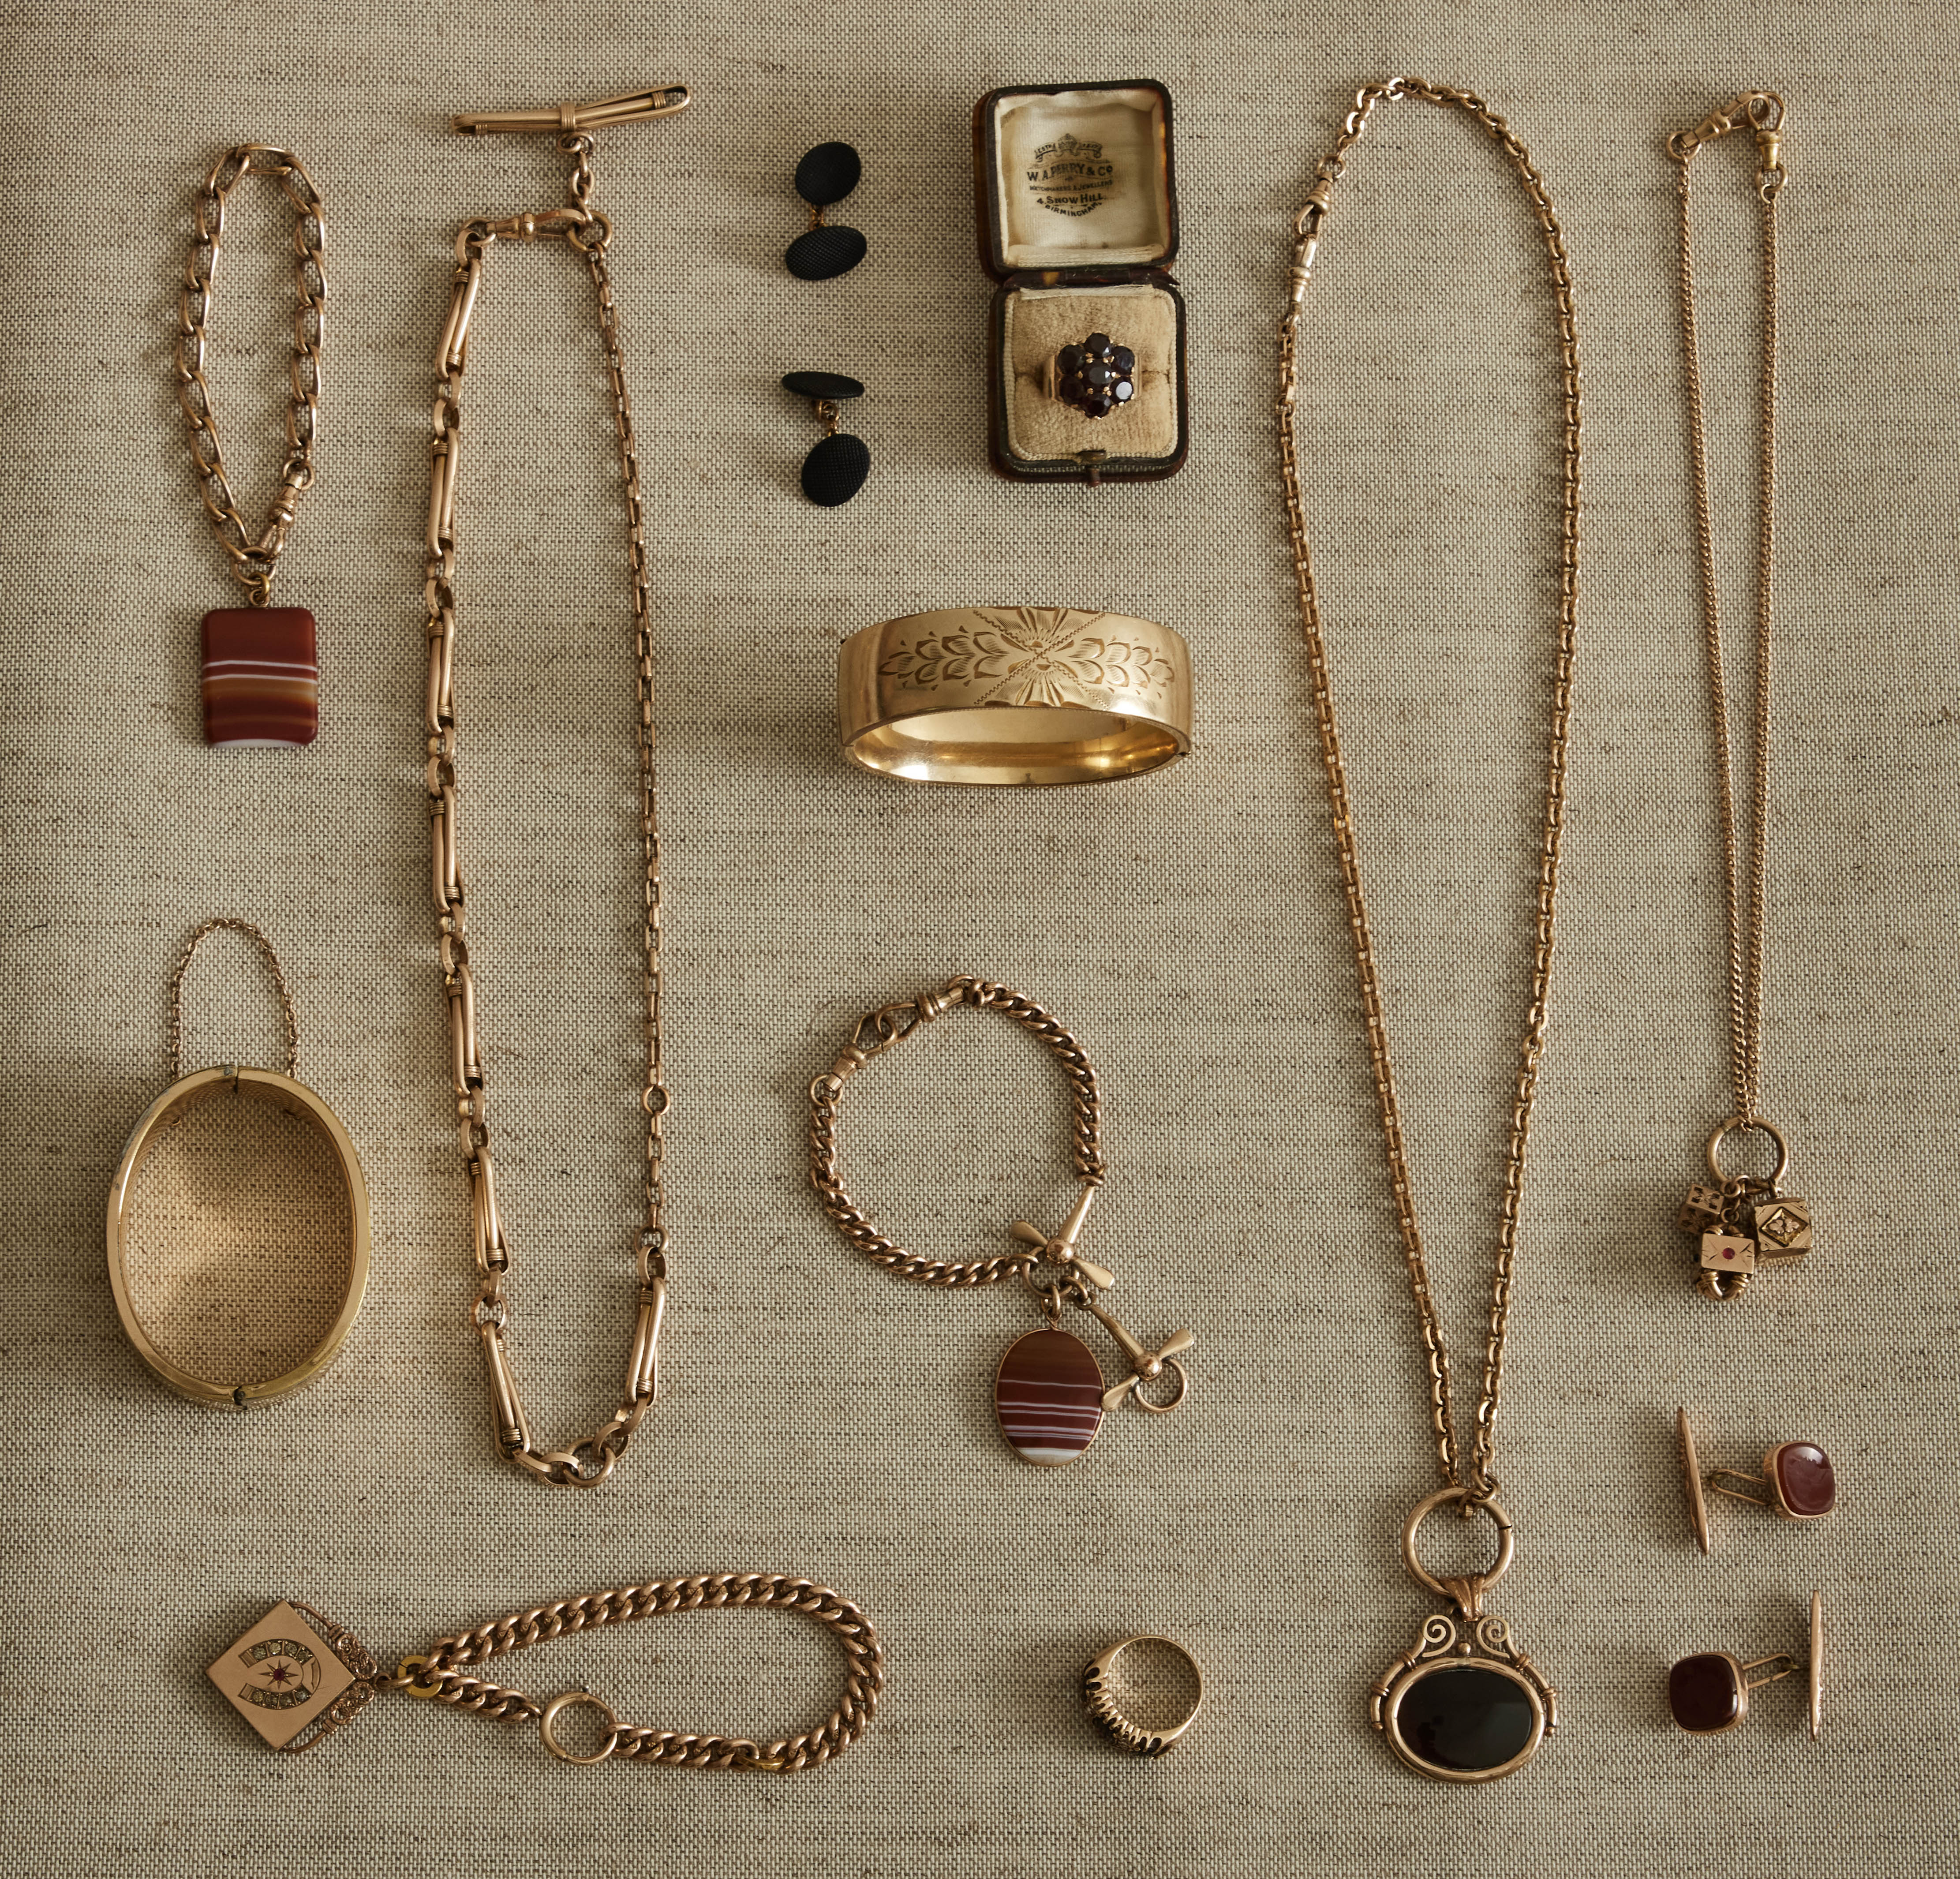 Vintage Jewelry Trunk Show with Suzanne Donegan